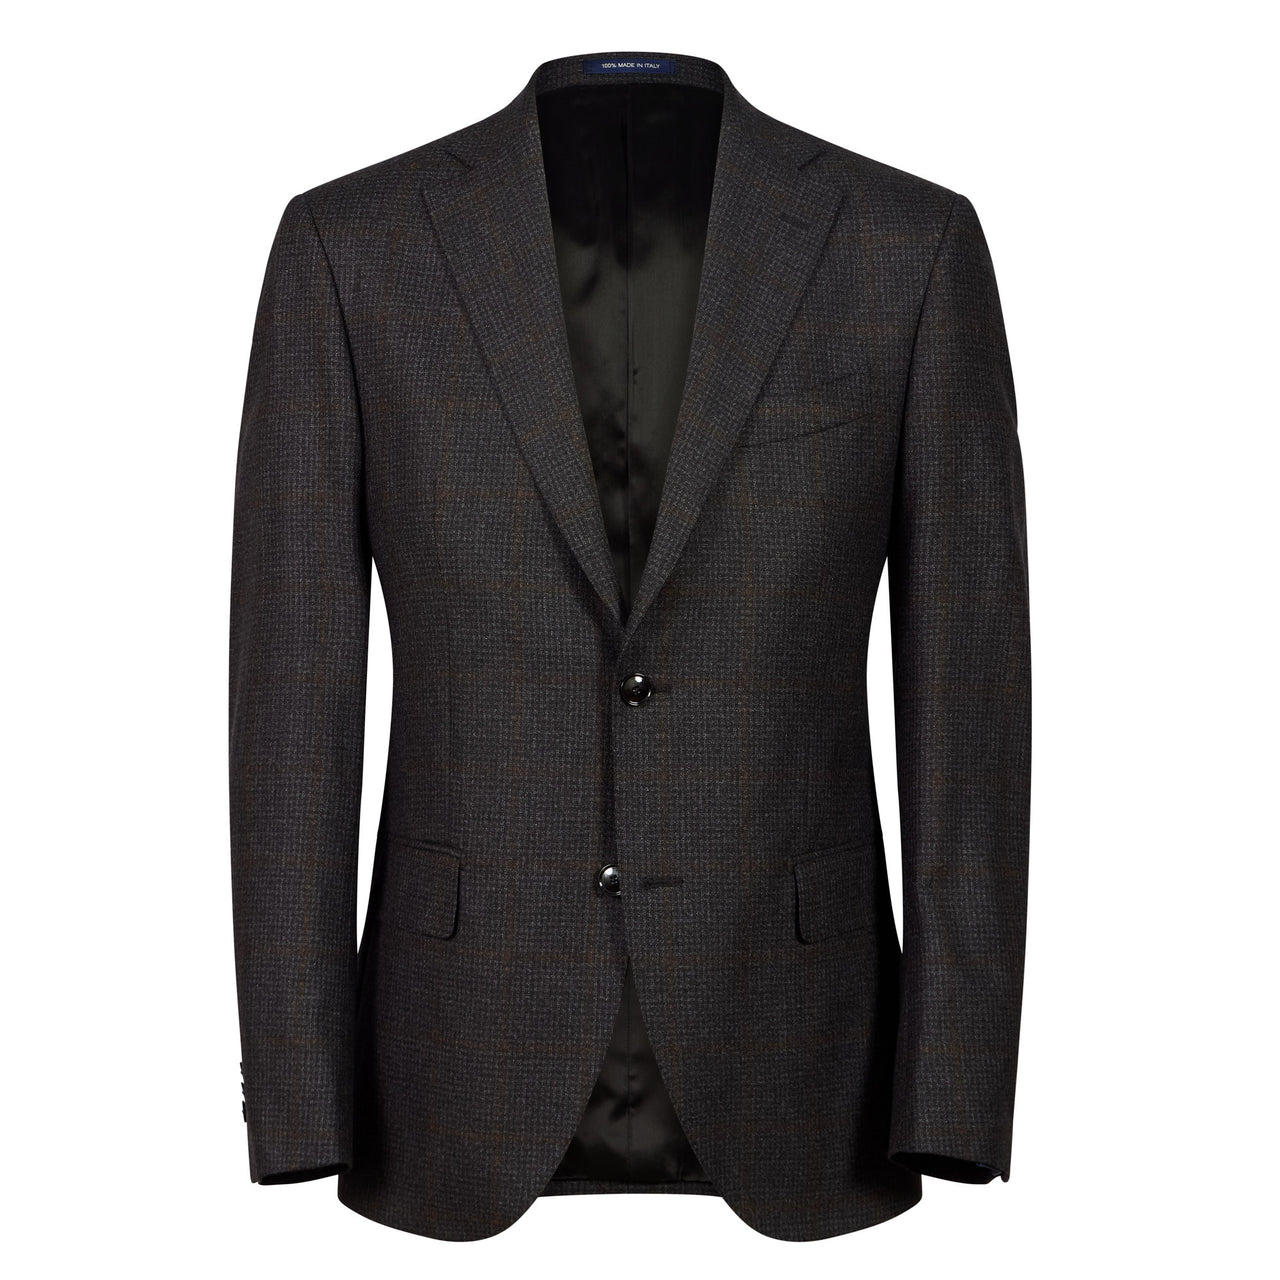 HENRY SARTORIAL X LATORRE Check Jacket CHARCOAL